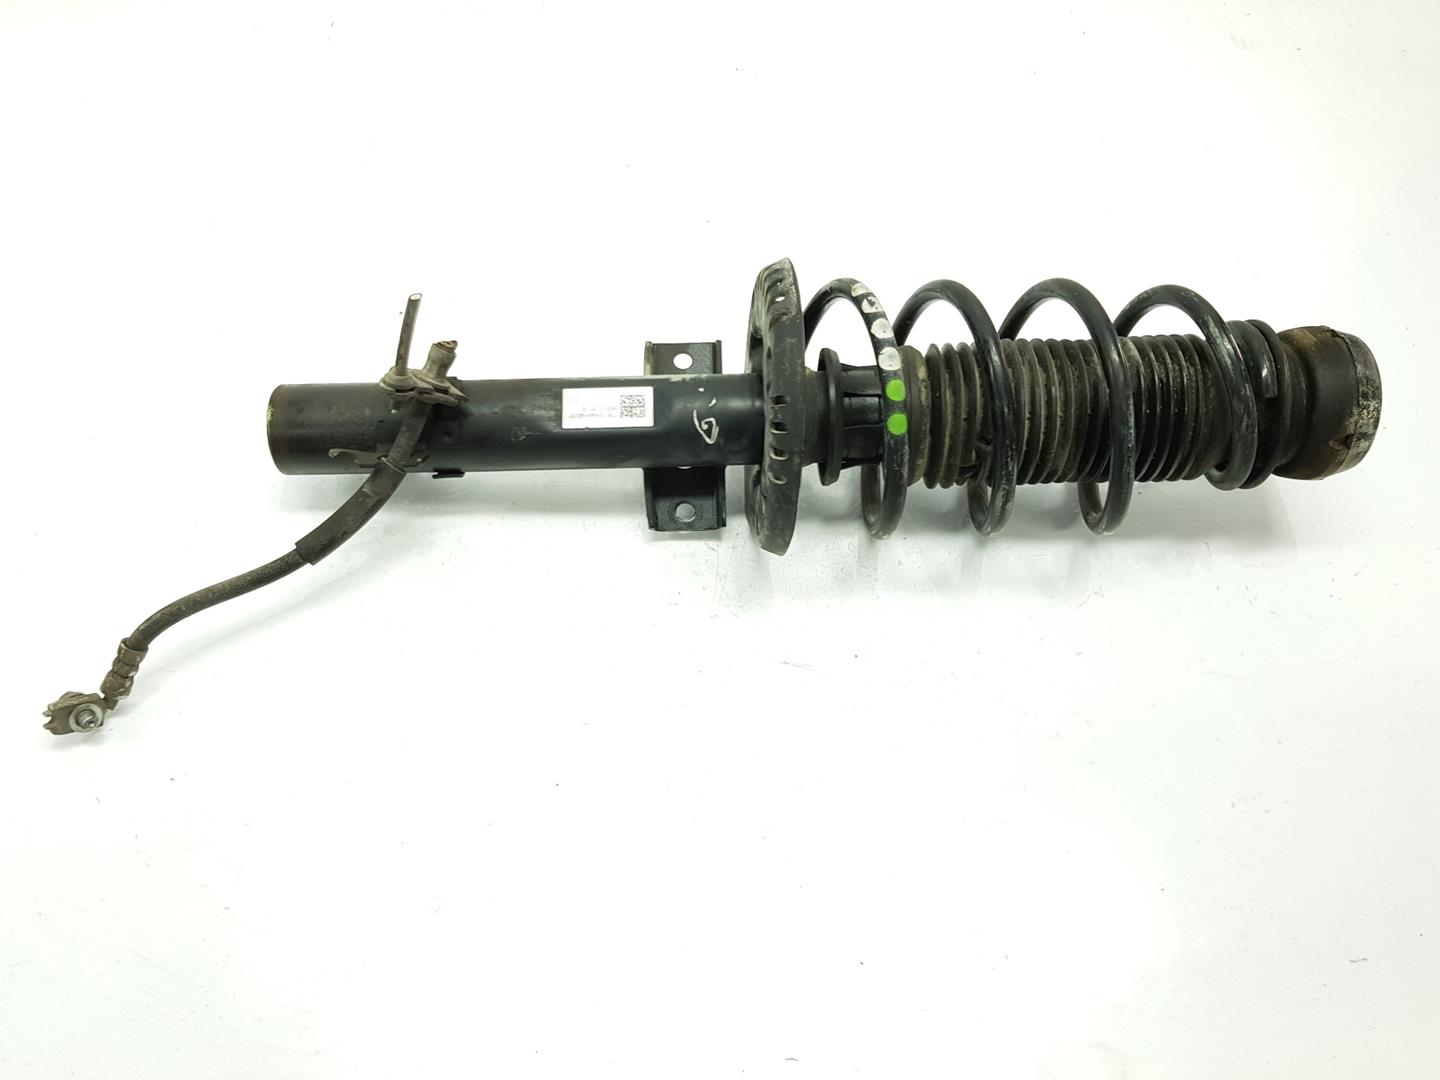 SEAT Toledo 4 generation (2012-2020) Front Right Shock Absorber 6R0413031BF, 6R0413031BF 23826587